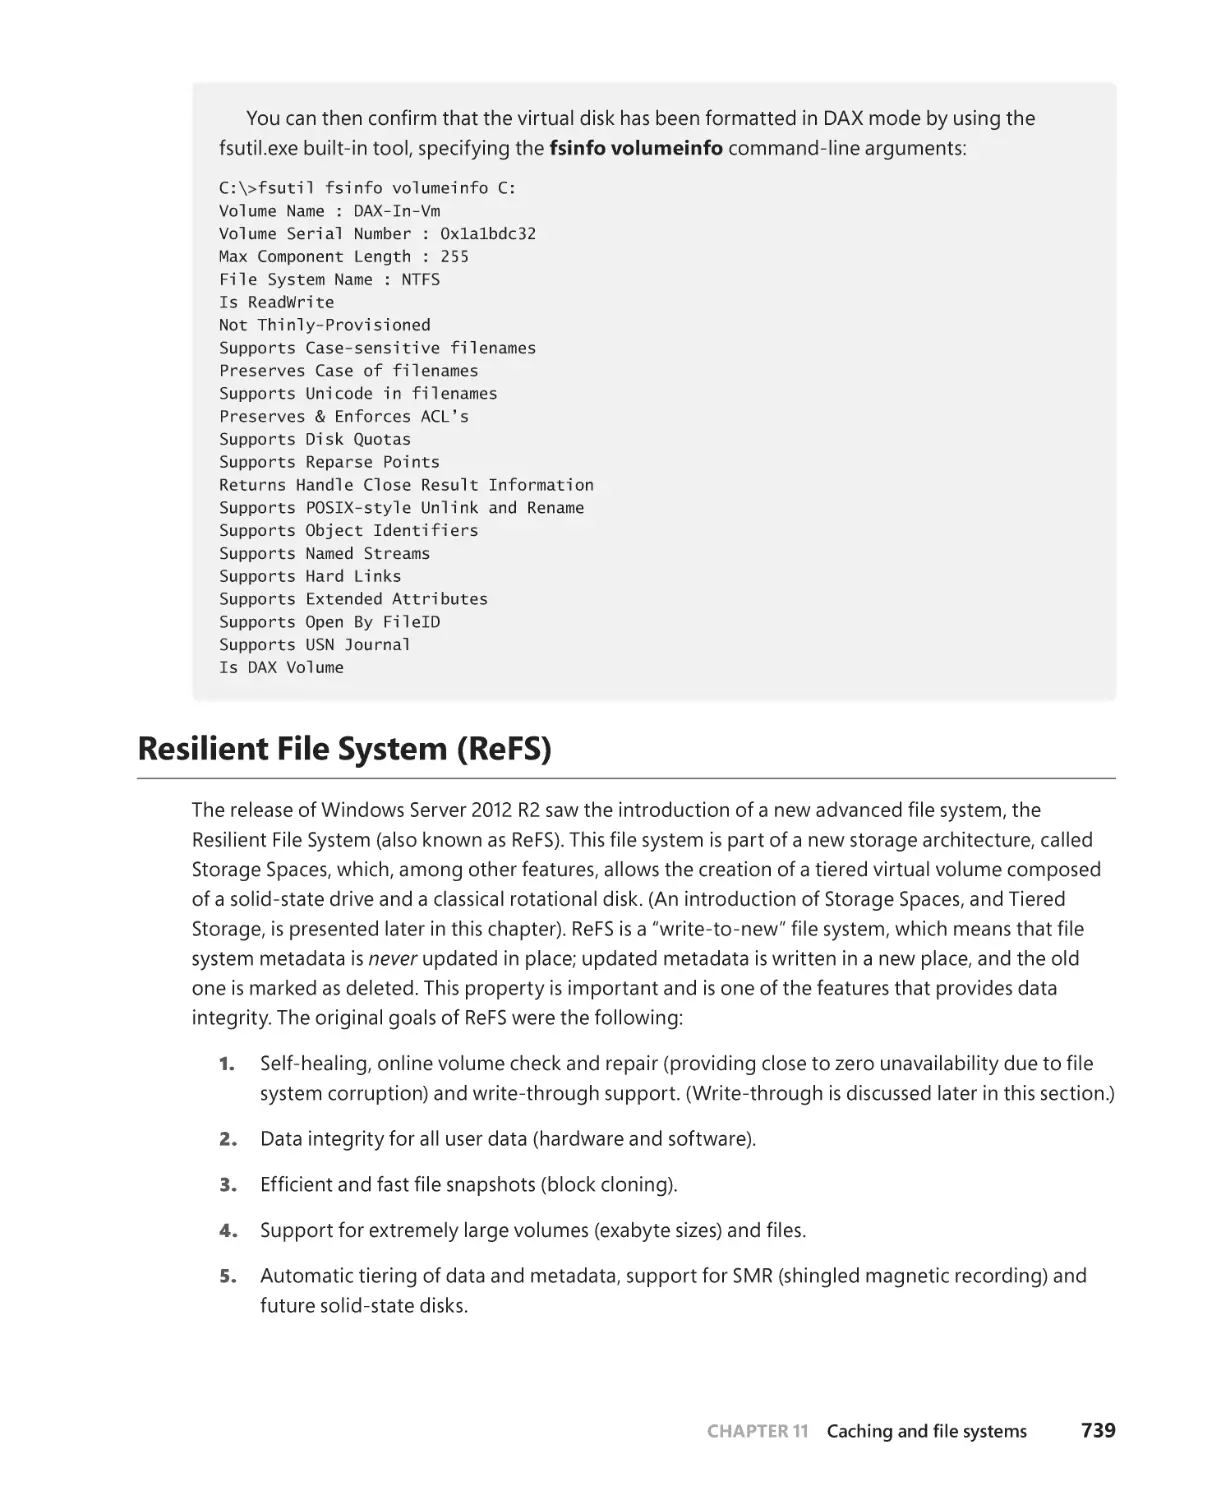 Resilient File System (ReFS)